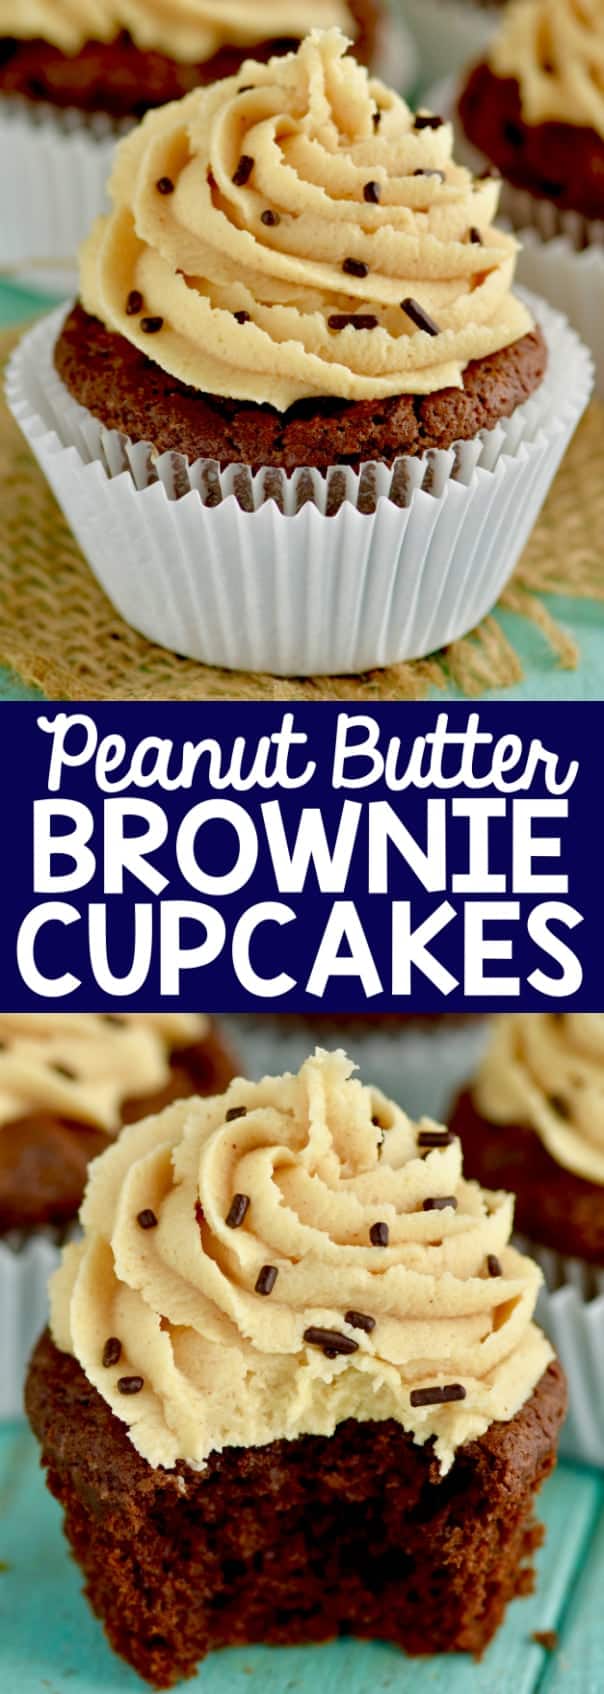 In white cupcake liners, are the Chocolate Peanut Butter Brownie Cupcakes topped with Peanut Butter frosting in a whipped shaped and chocolate sprinkles. 